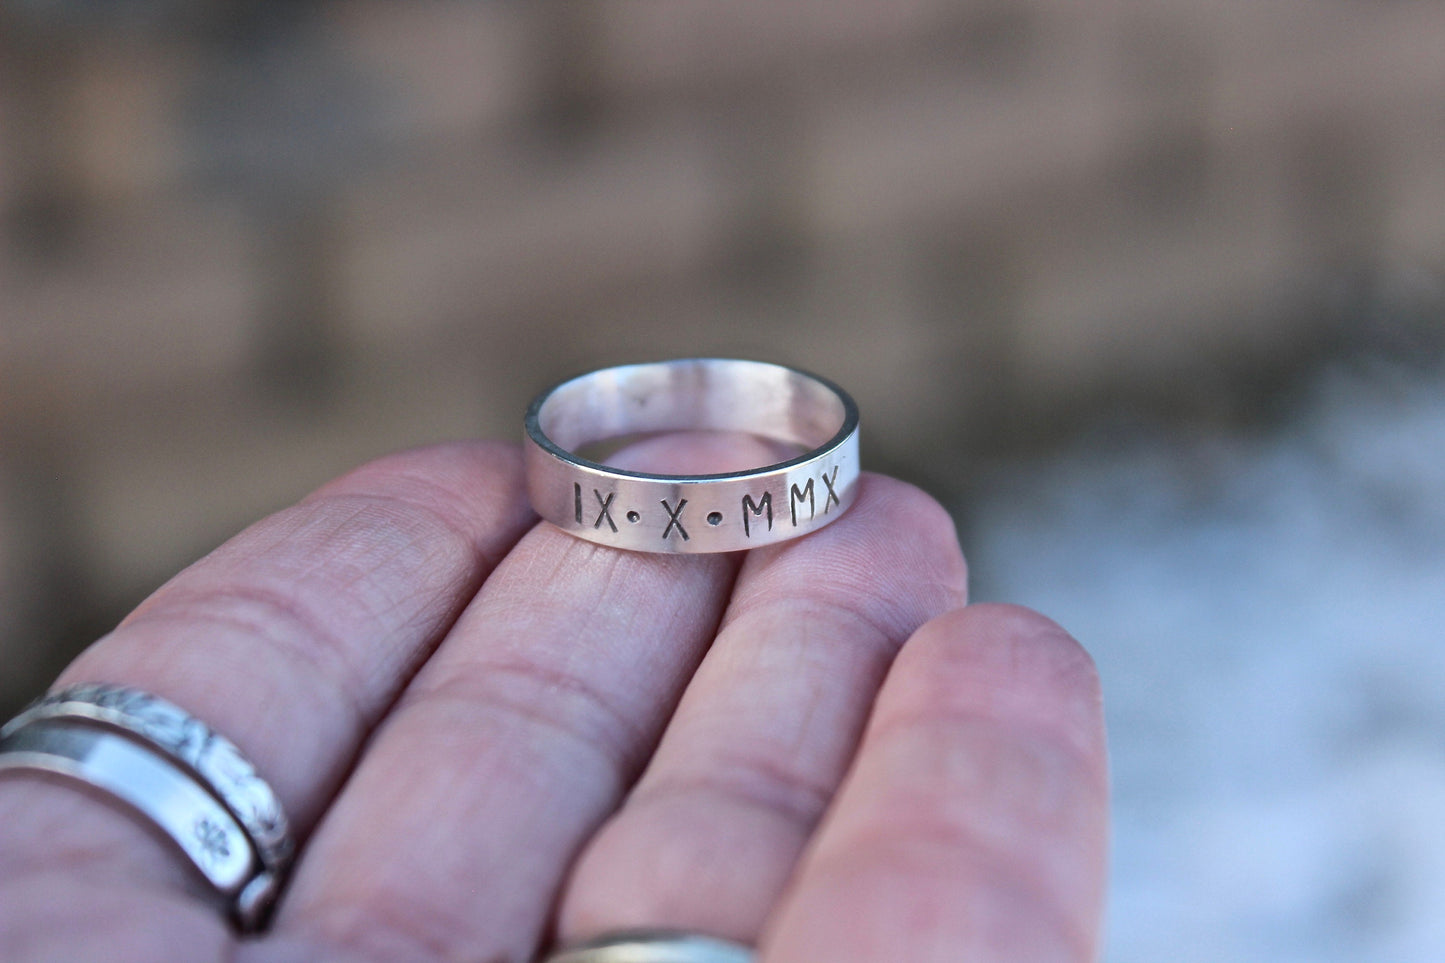 Men's Roman Numeral Date Ring, Sterling Silver Roman Numeral Date Ring, Anniversary Ring for Men, Men's Anniversary Ring, Gift for Husband